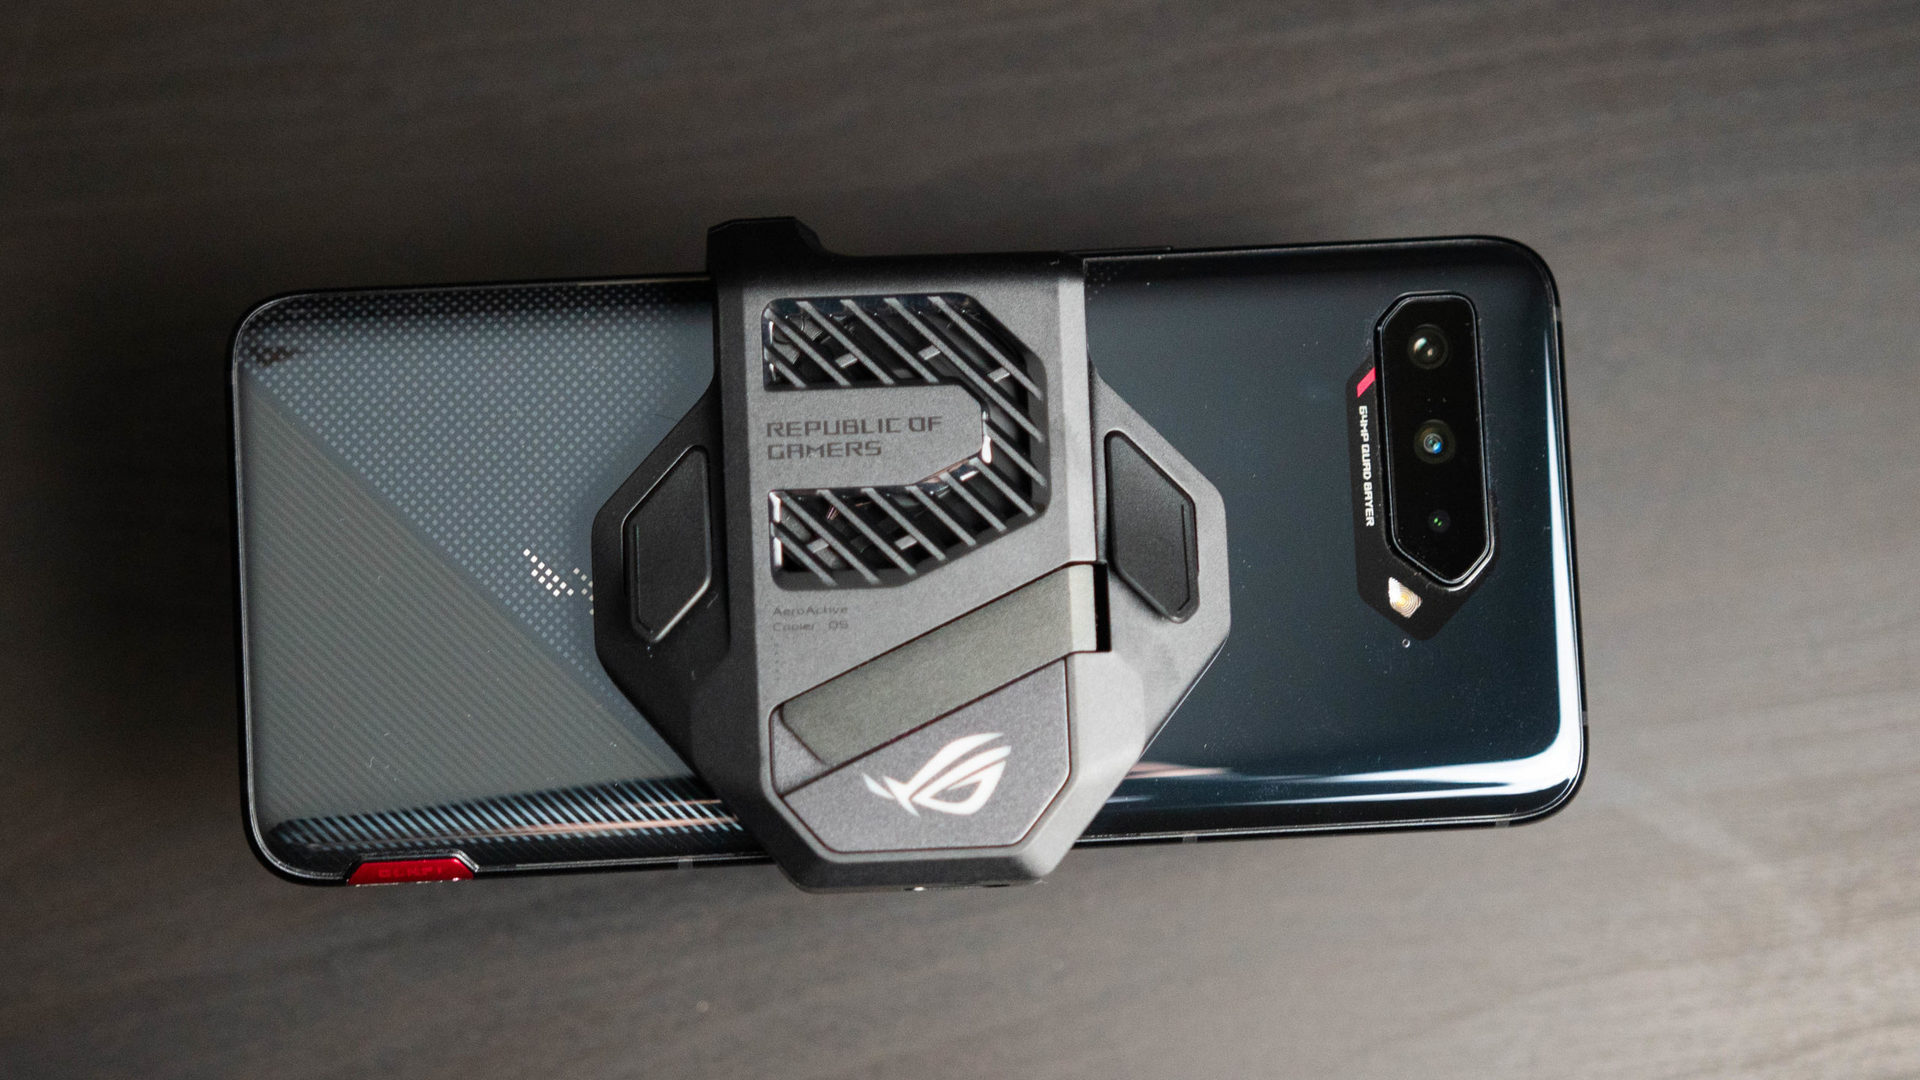 https://www.androidauthority.com/asus-rog-phone-5-review-1206891/